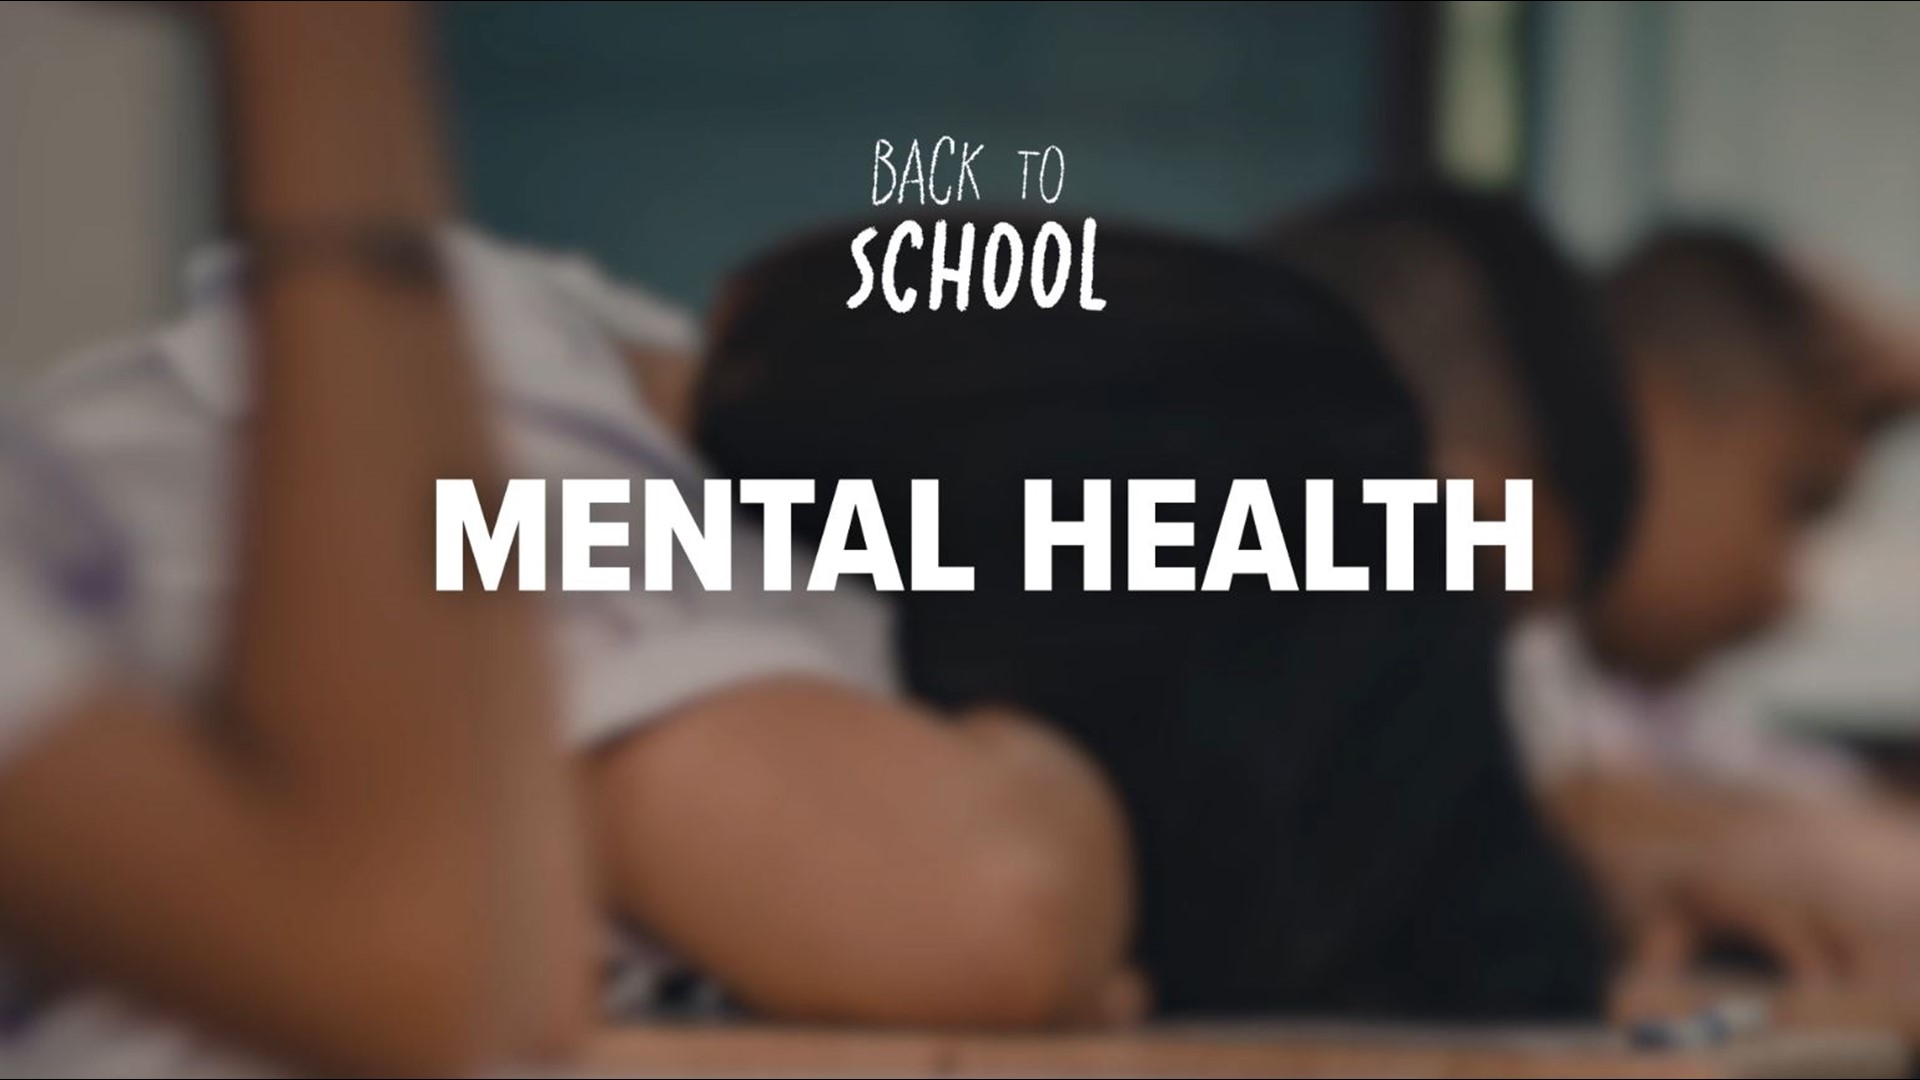 As students head back to class, it is important to check in on their mental health. Tips to deal with anxiety and bullying, as well as how teachers can cope as well.